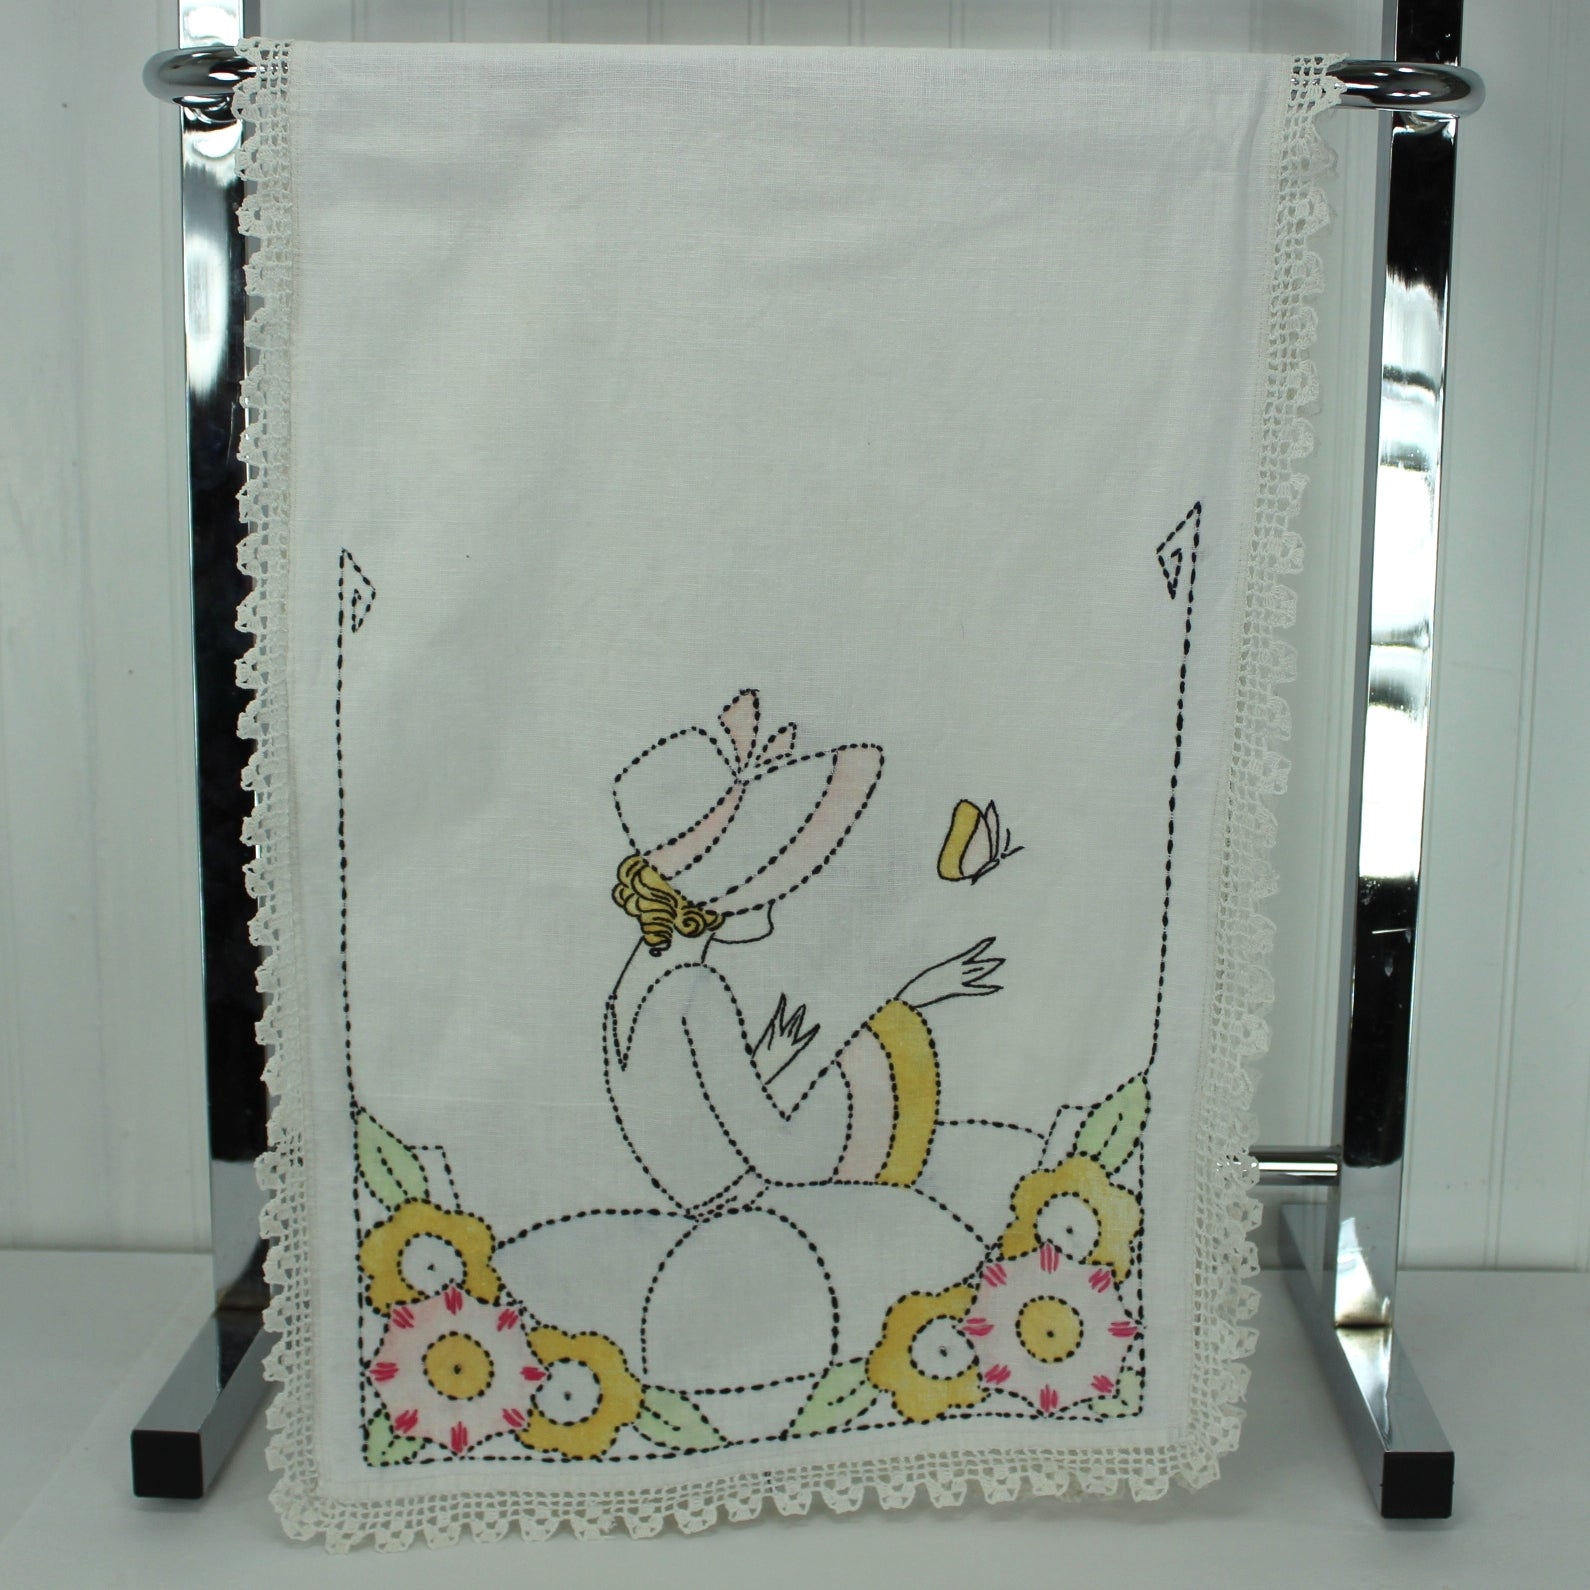 Vintage 1940s 50s Linen Table Runner Bonnet Lady Embroidered Special Price DIY purse blouse repurpose